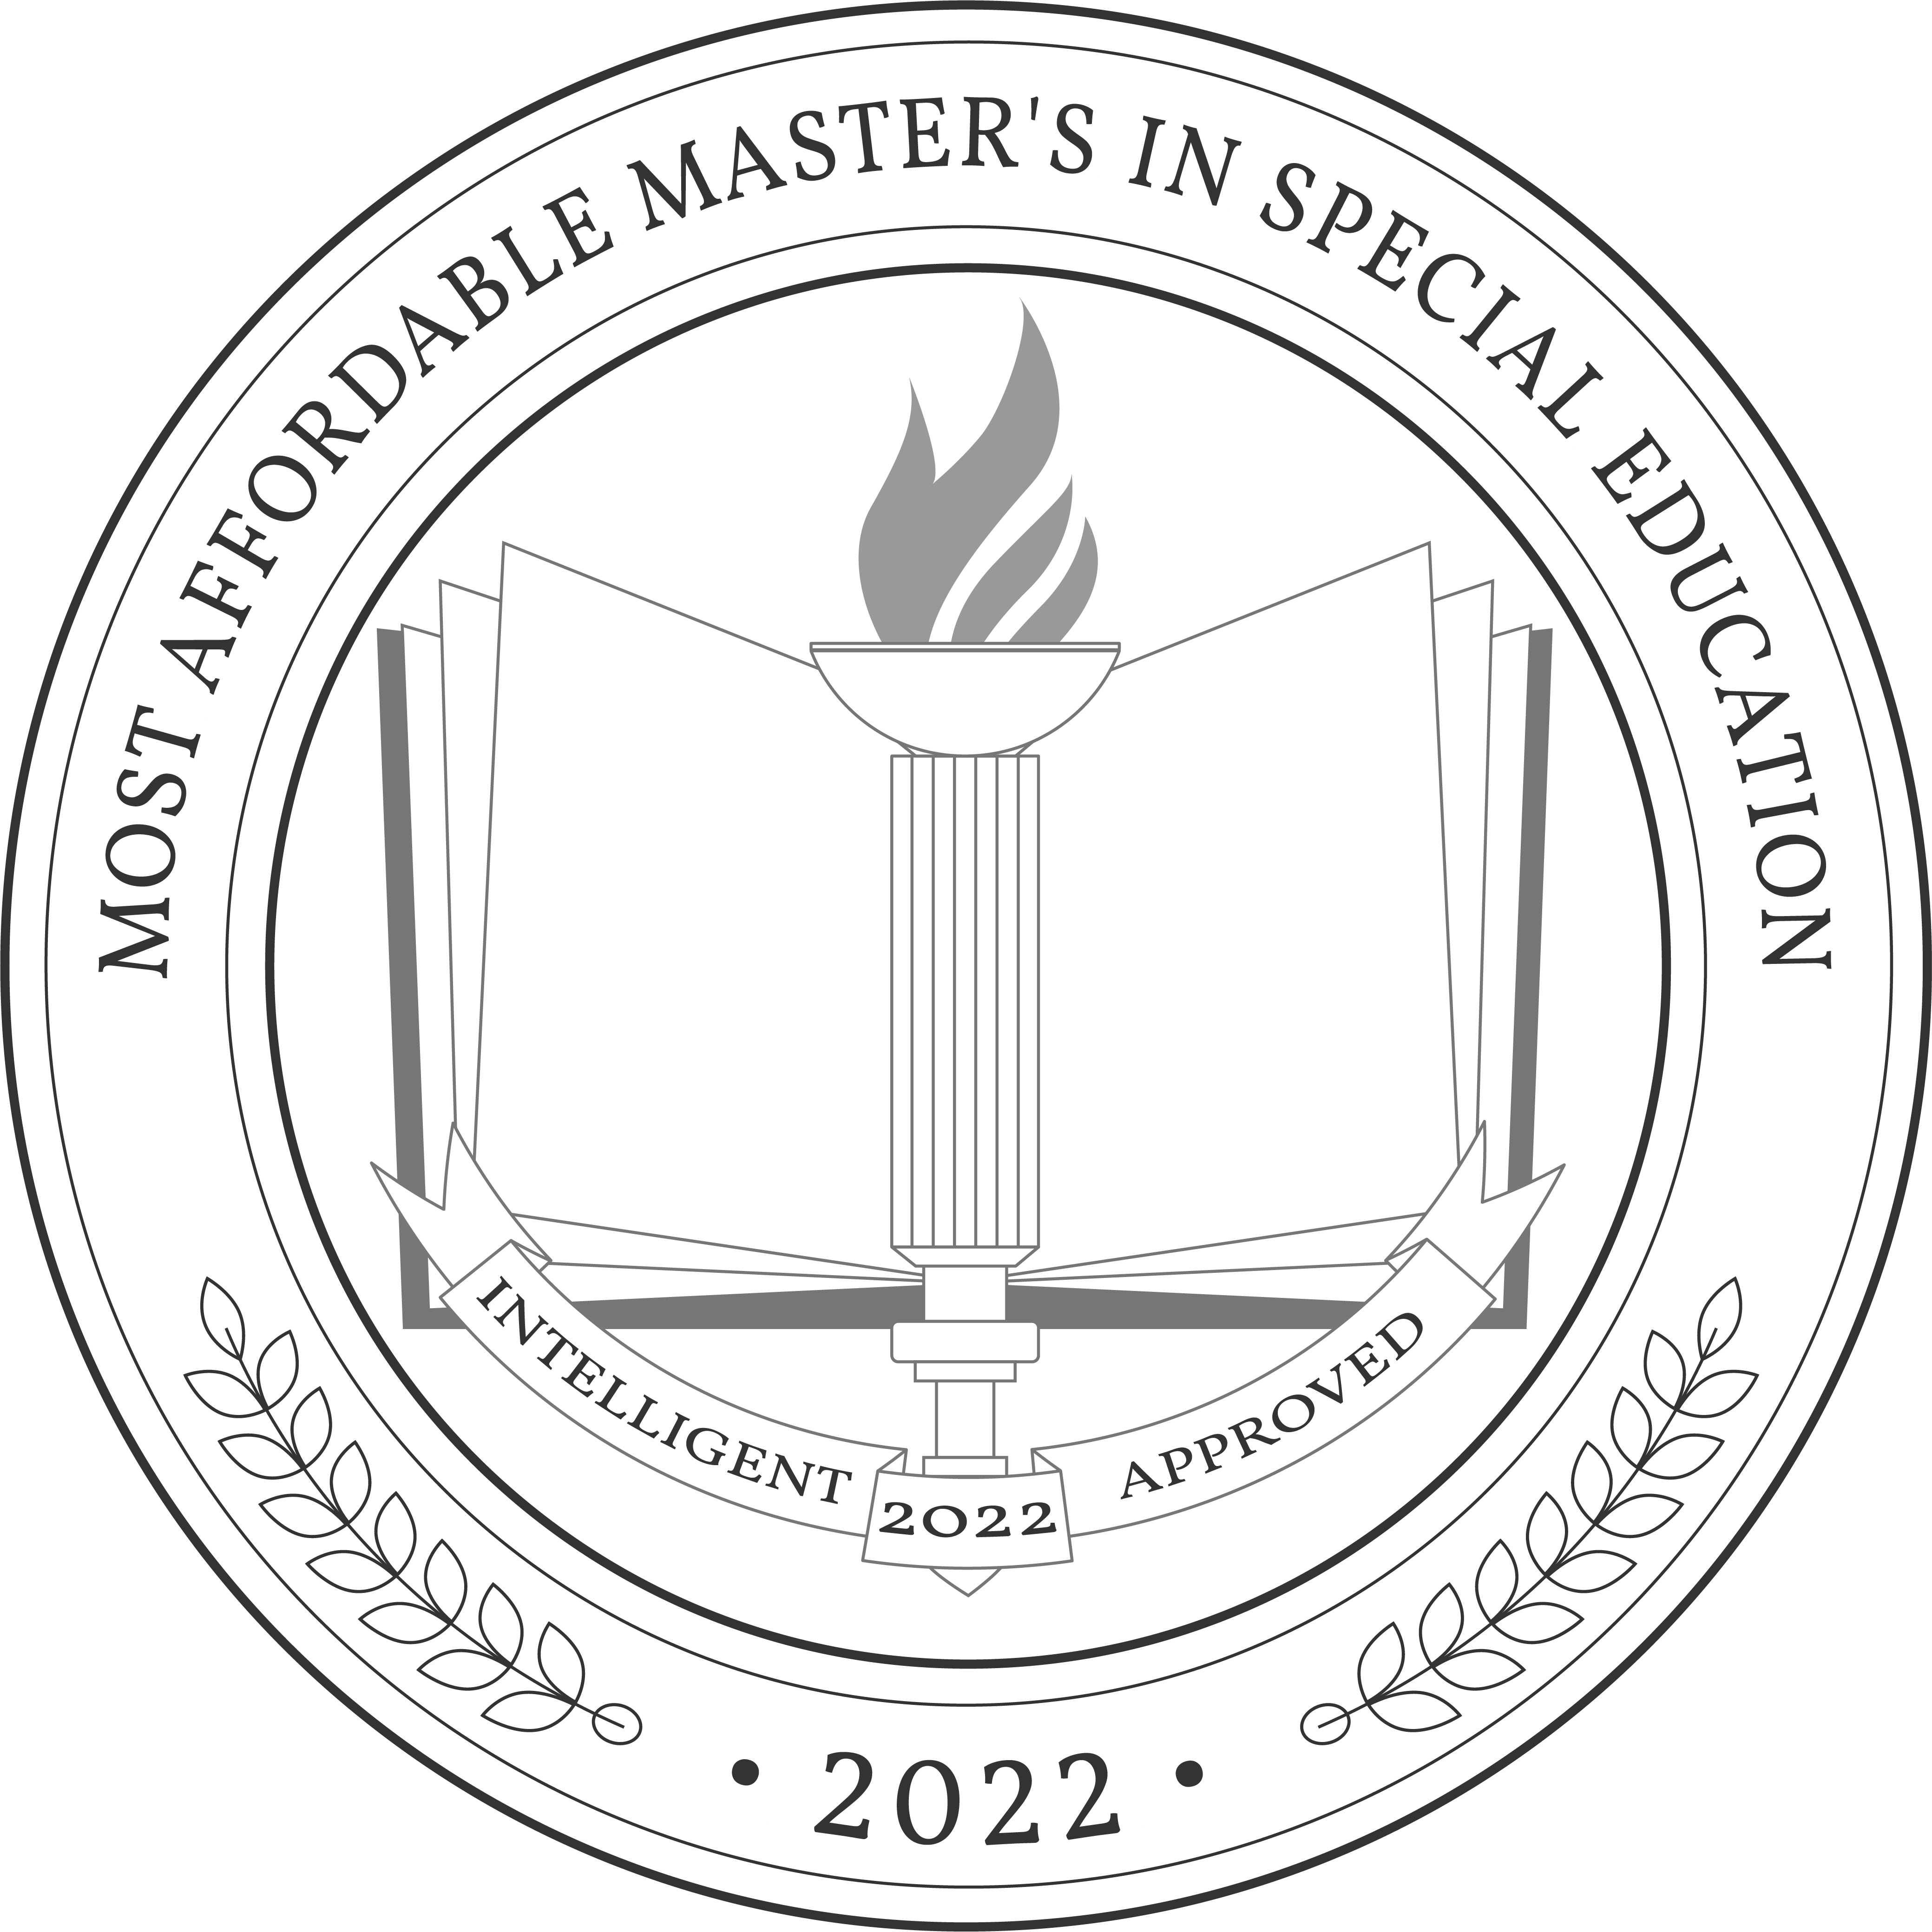 most-affordable-master_s-in-special-education-badge.png